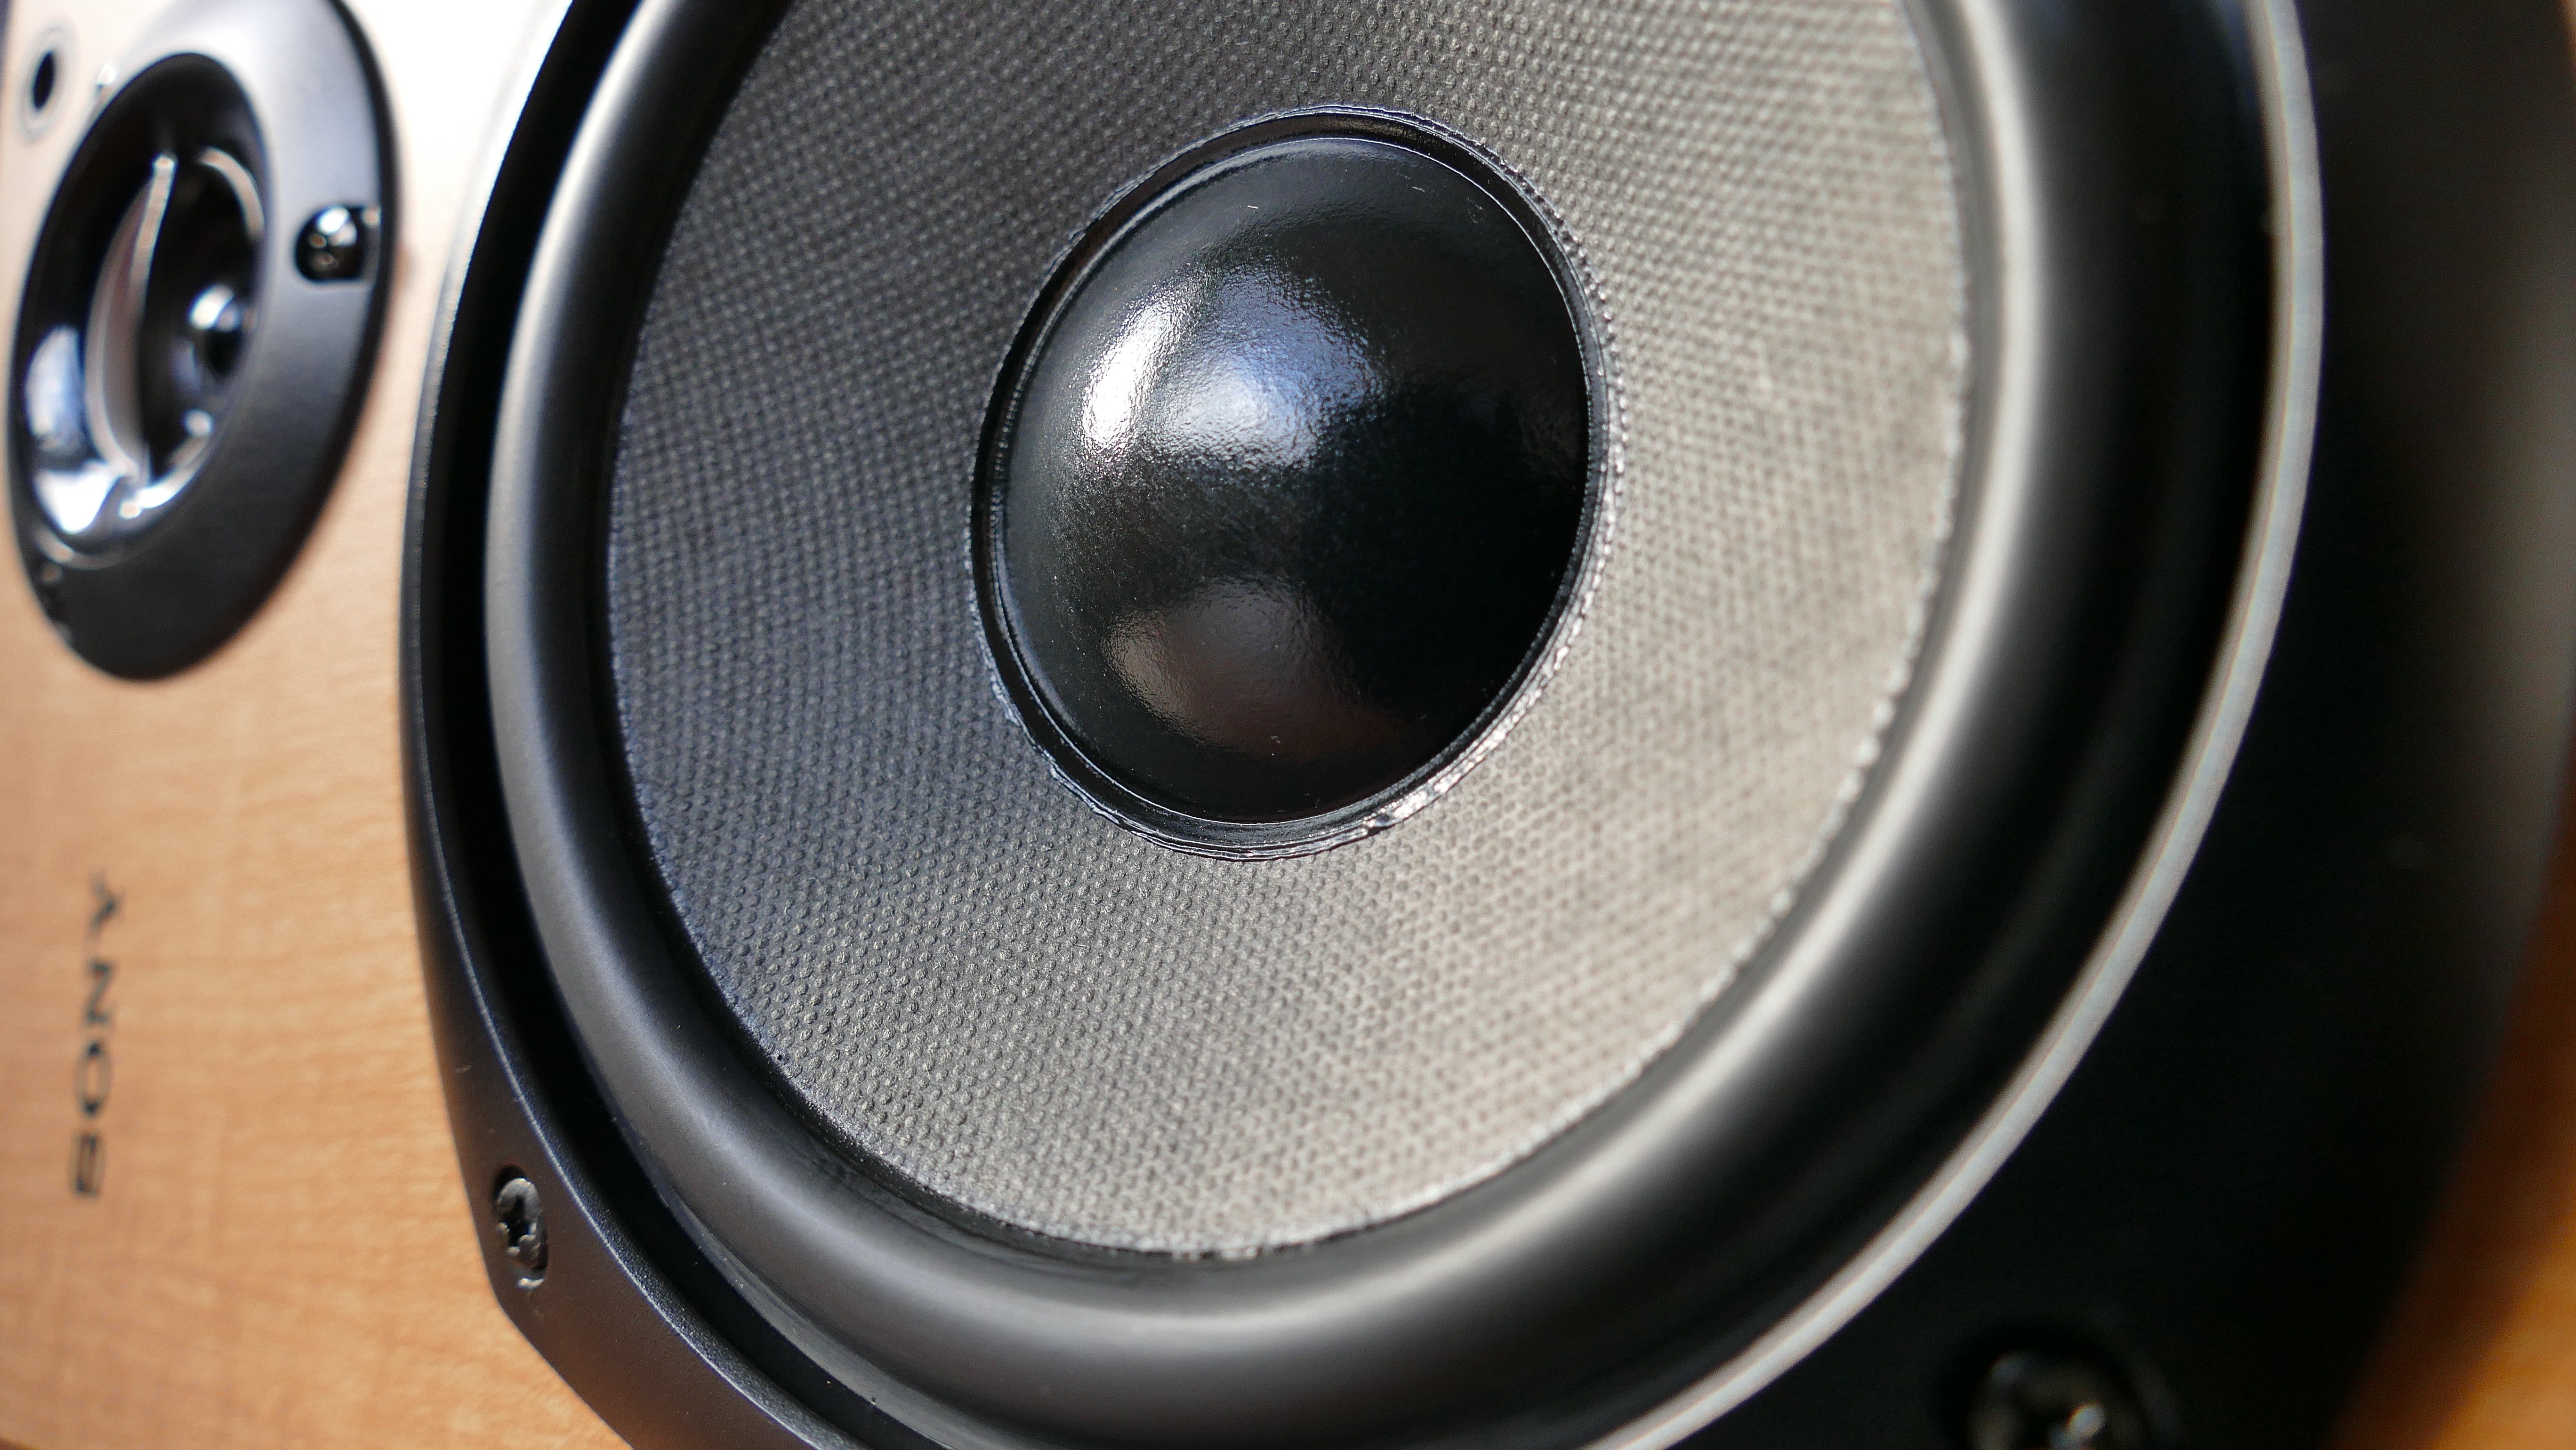 Lisa often played loud music to distract me from work | Photo: Pexels